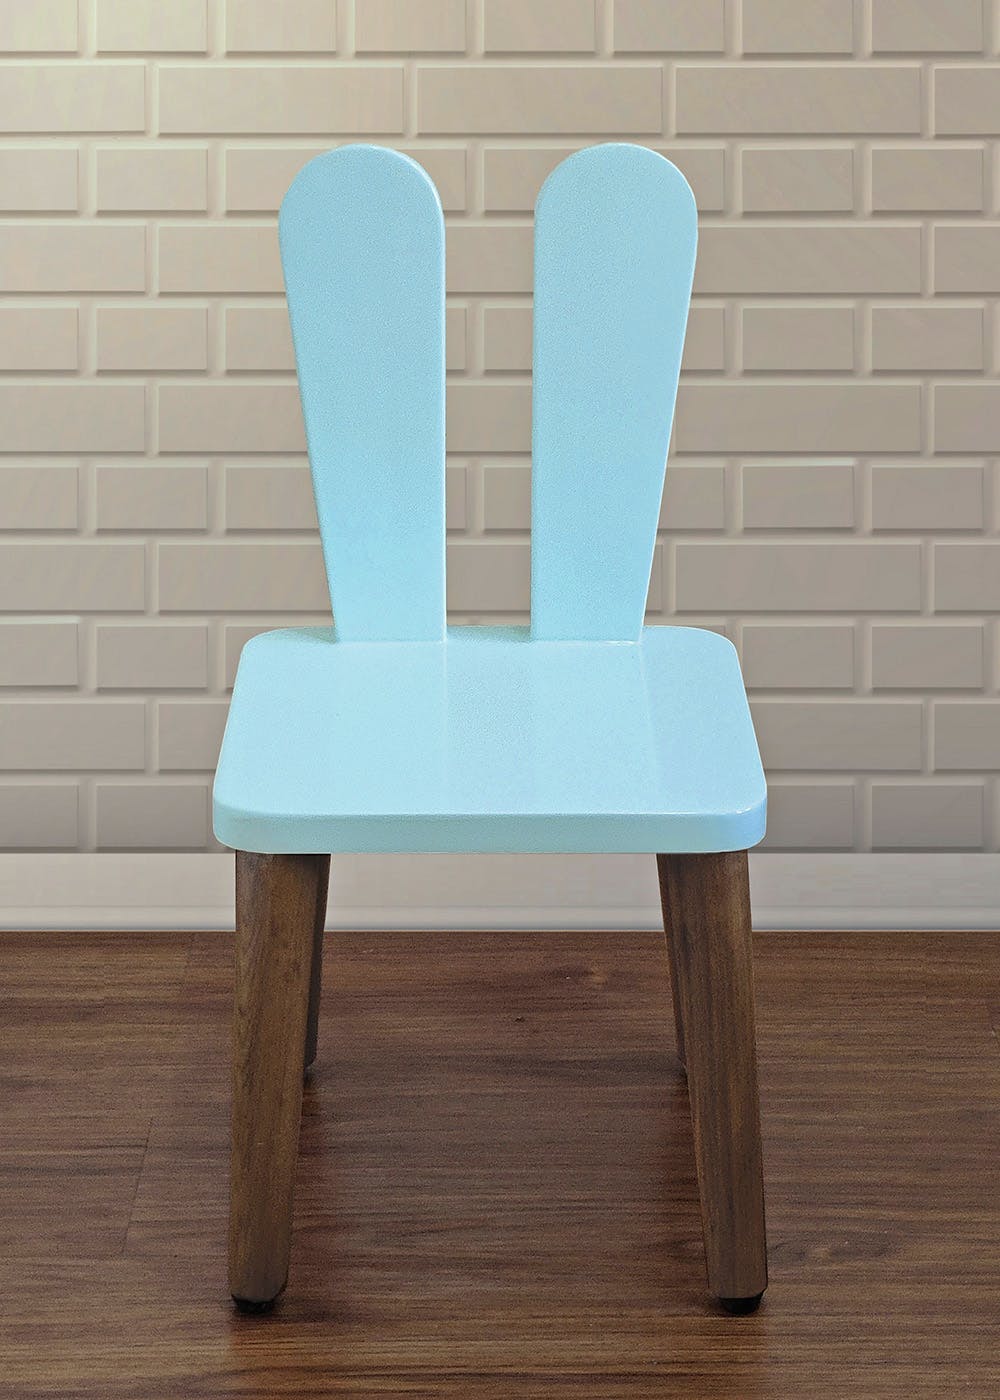  Bunny Chair for kids - Blue